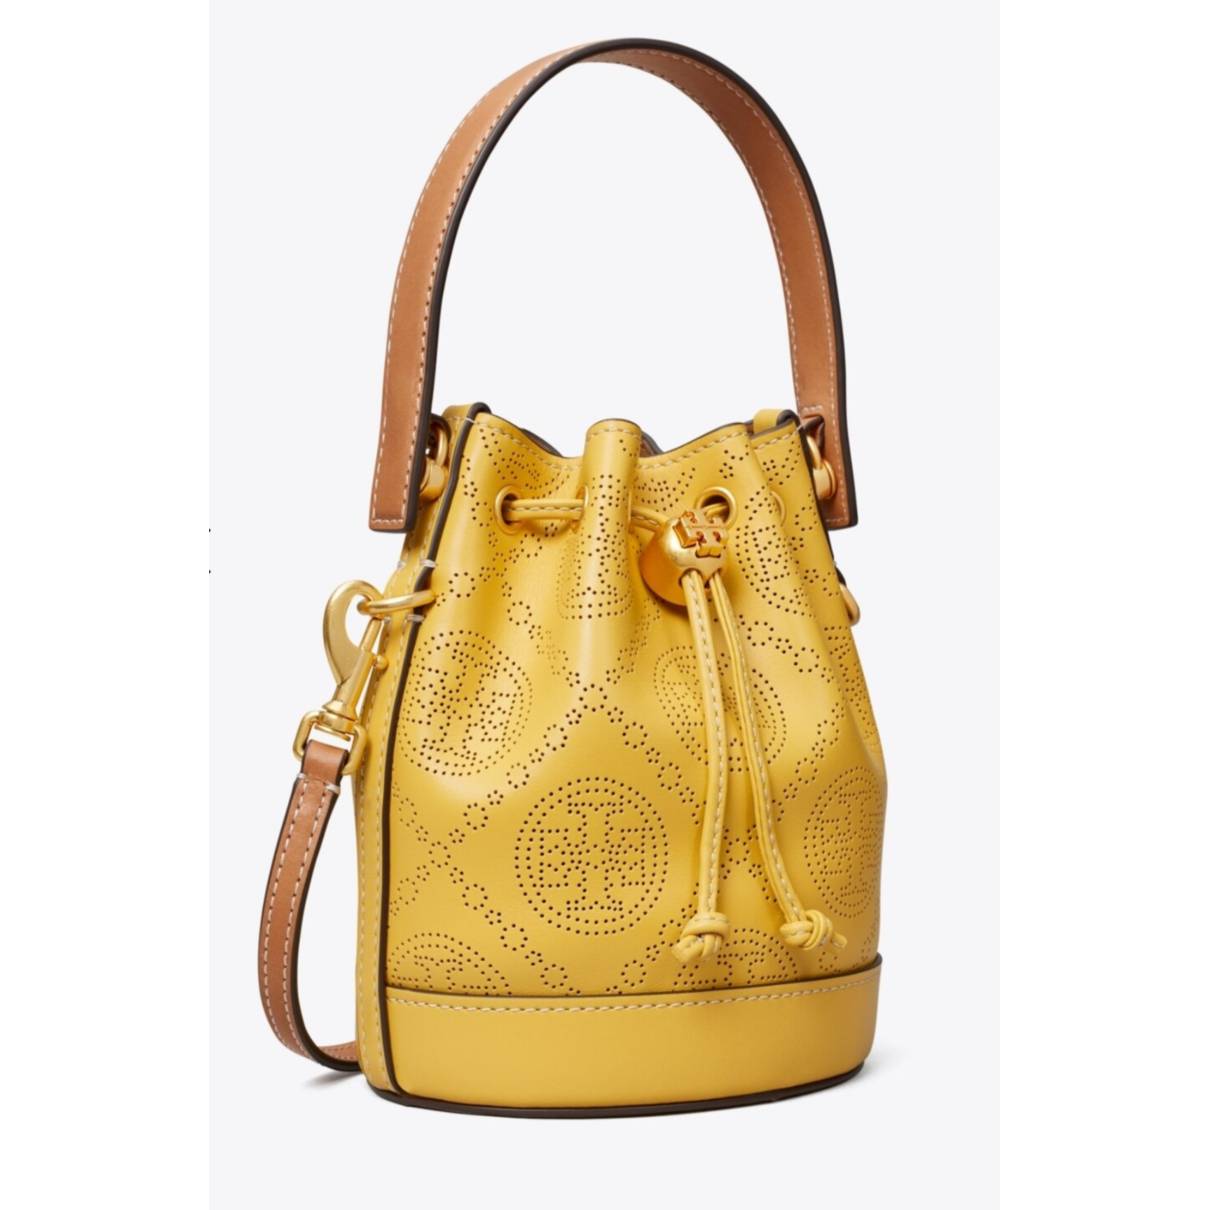 Leather handbag Tory Burch Yellow in Leather - 31584453